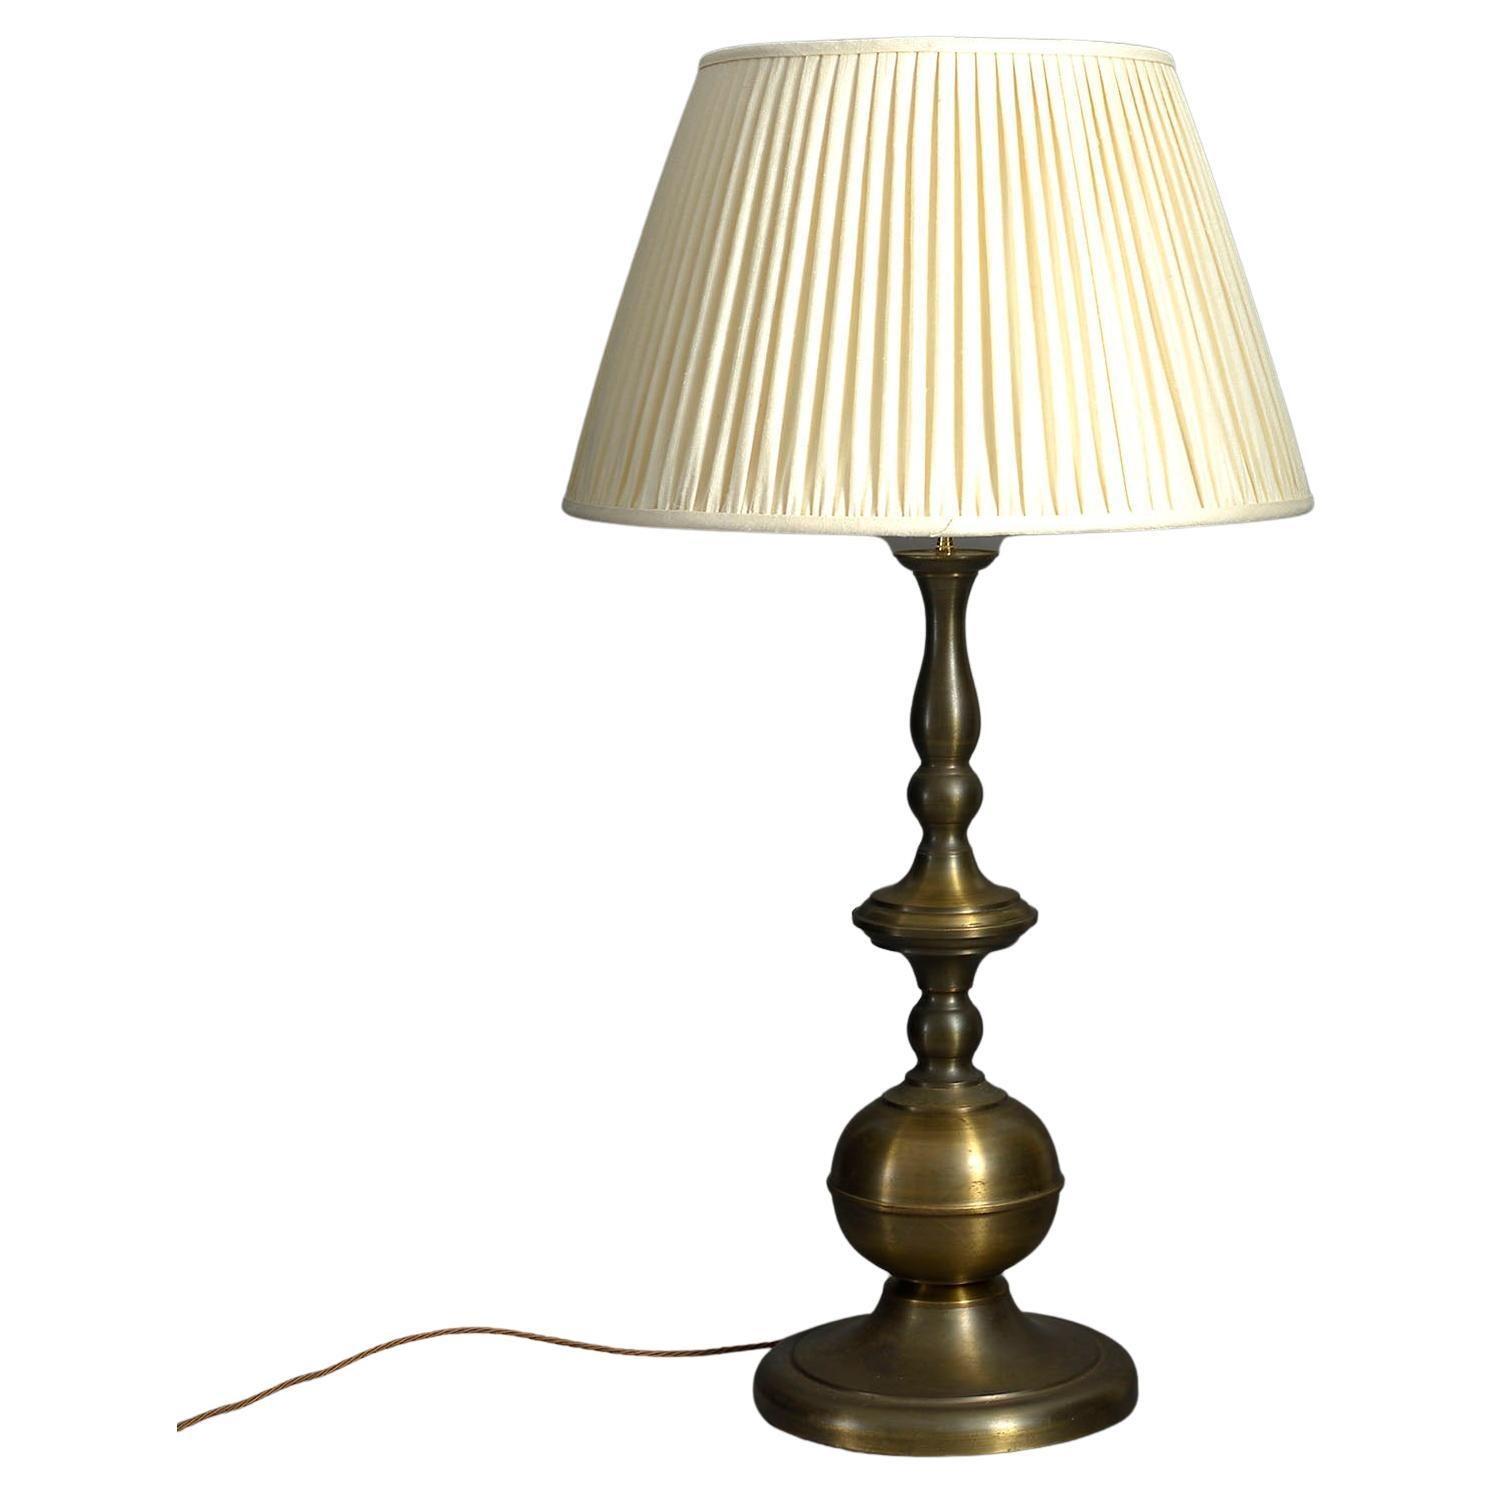 Large 20th Century, Turned Brass Table Lamp